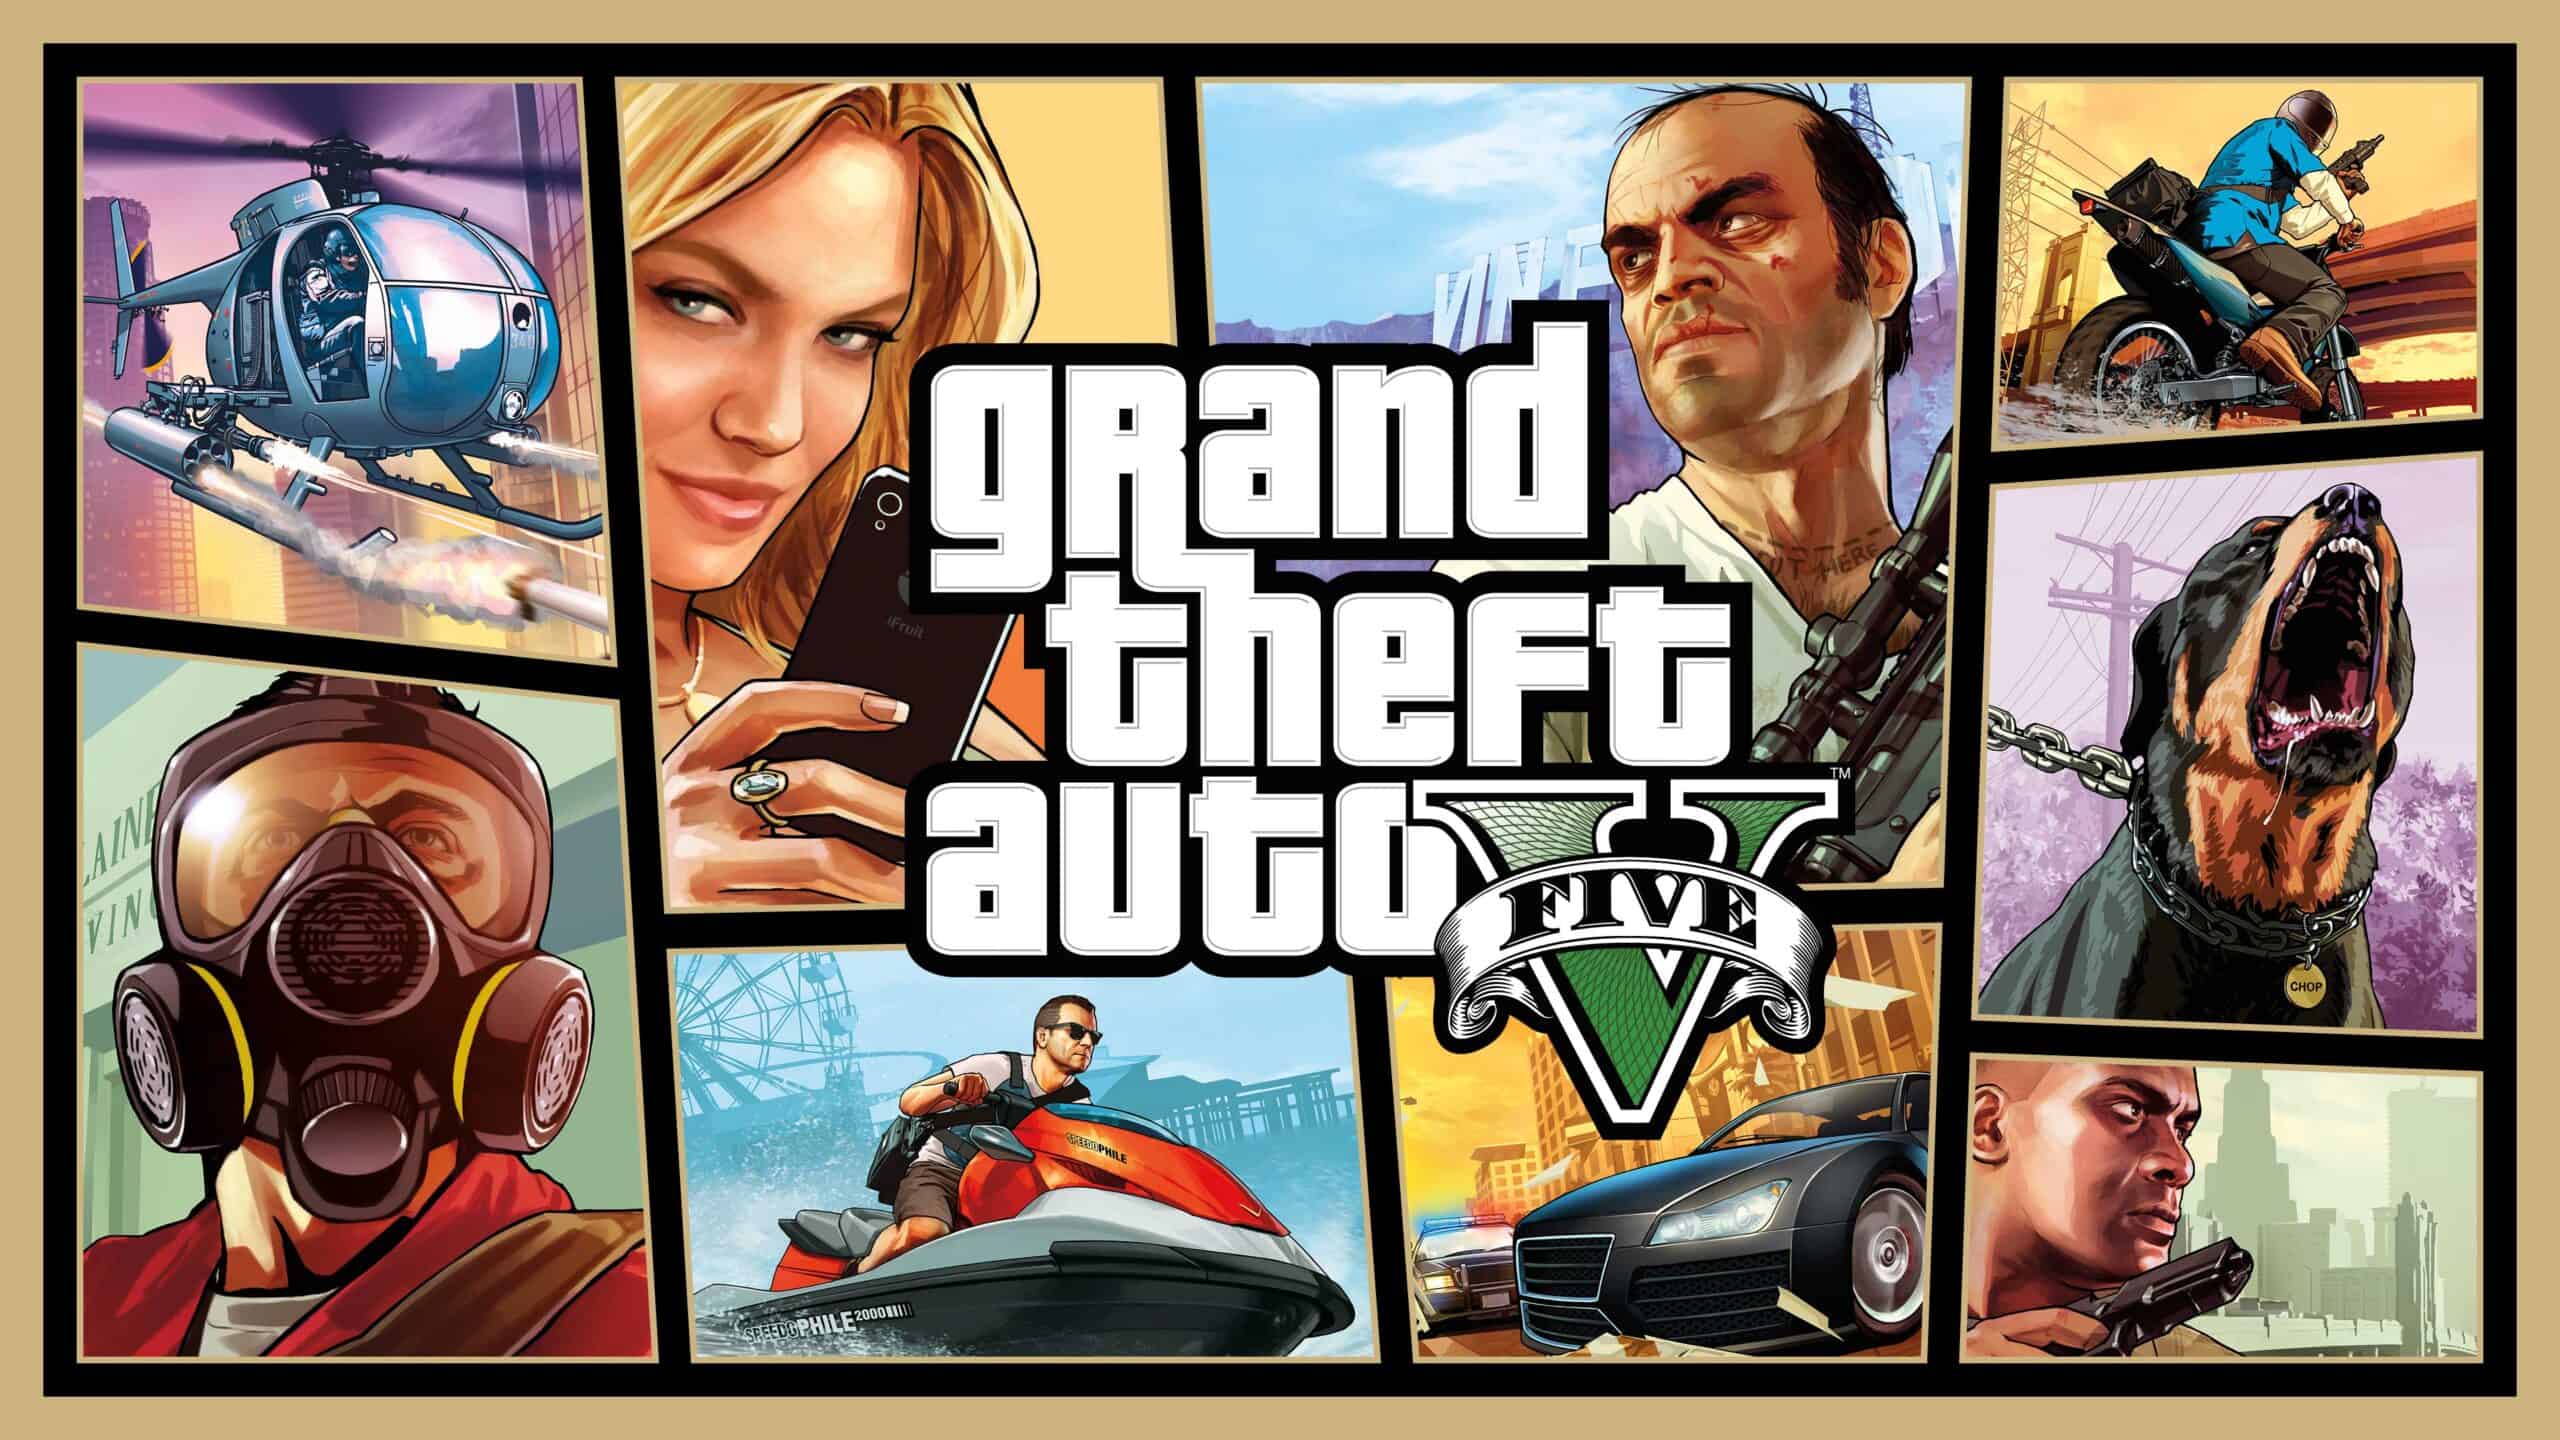 A promotional image for Grand Theft Auto V.